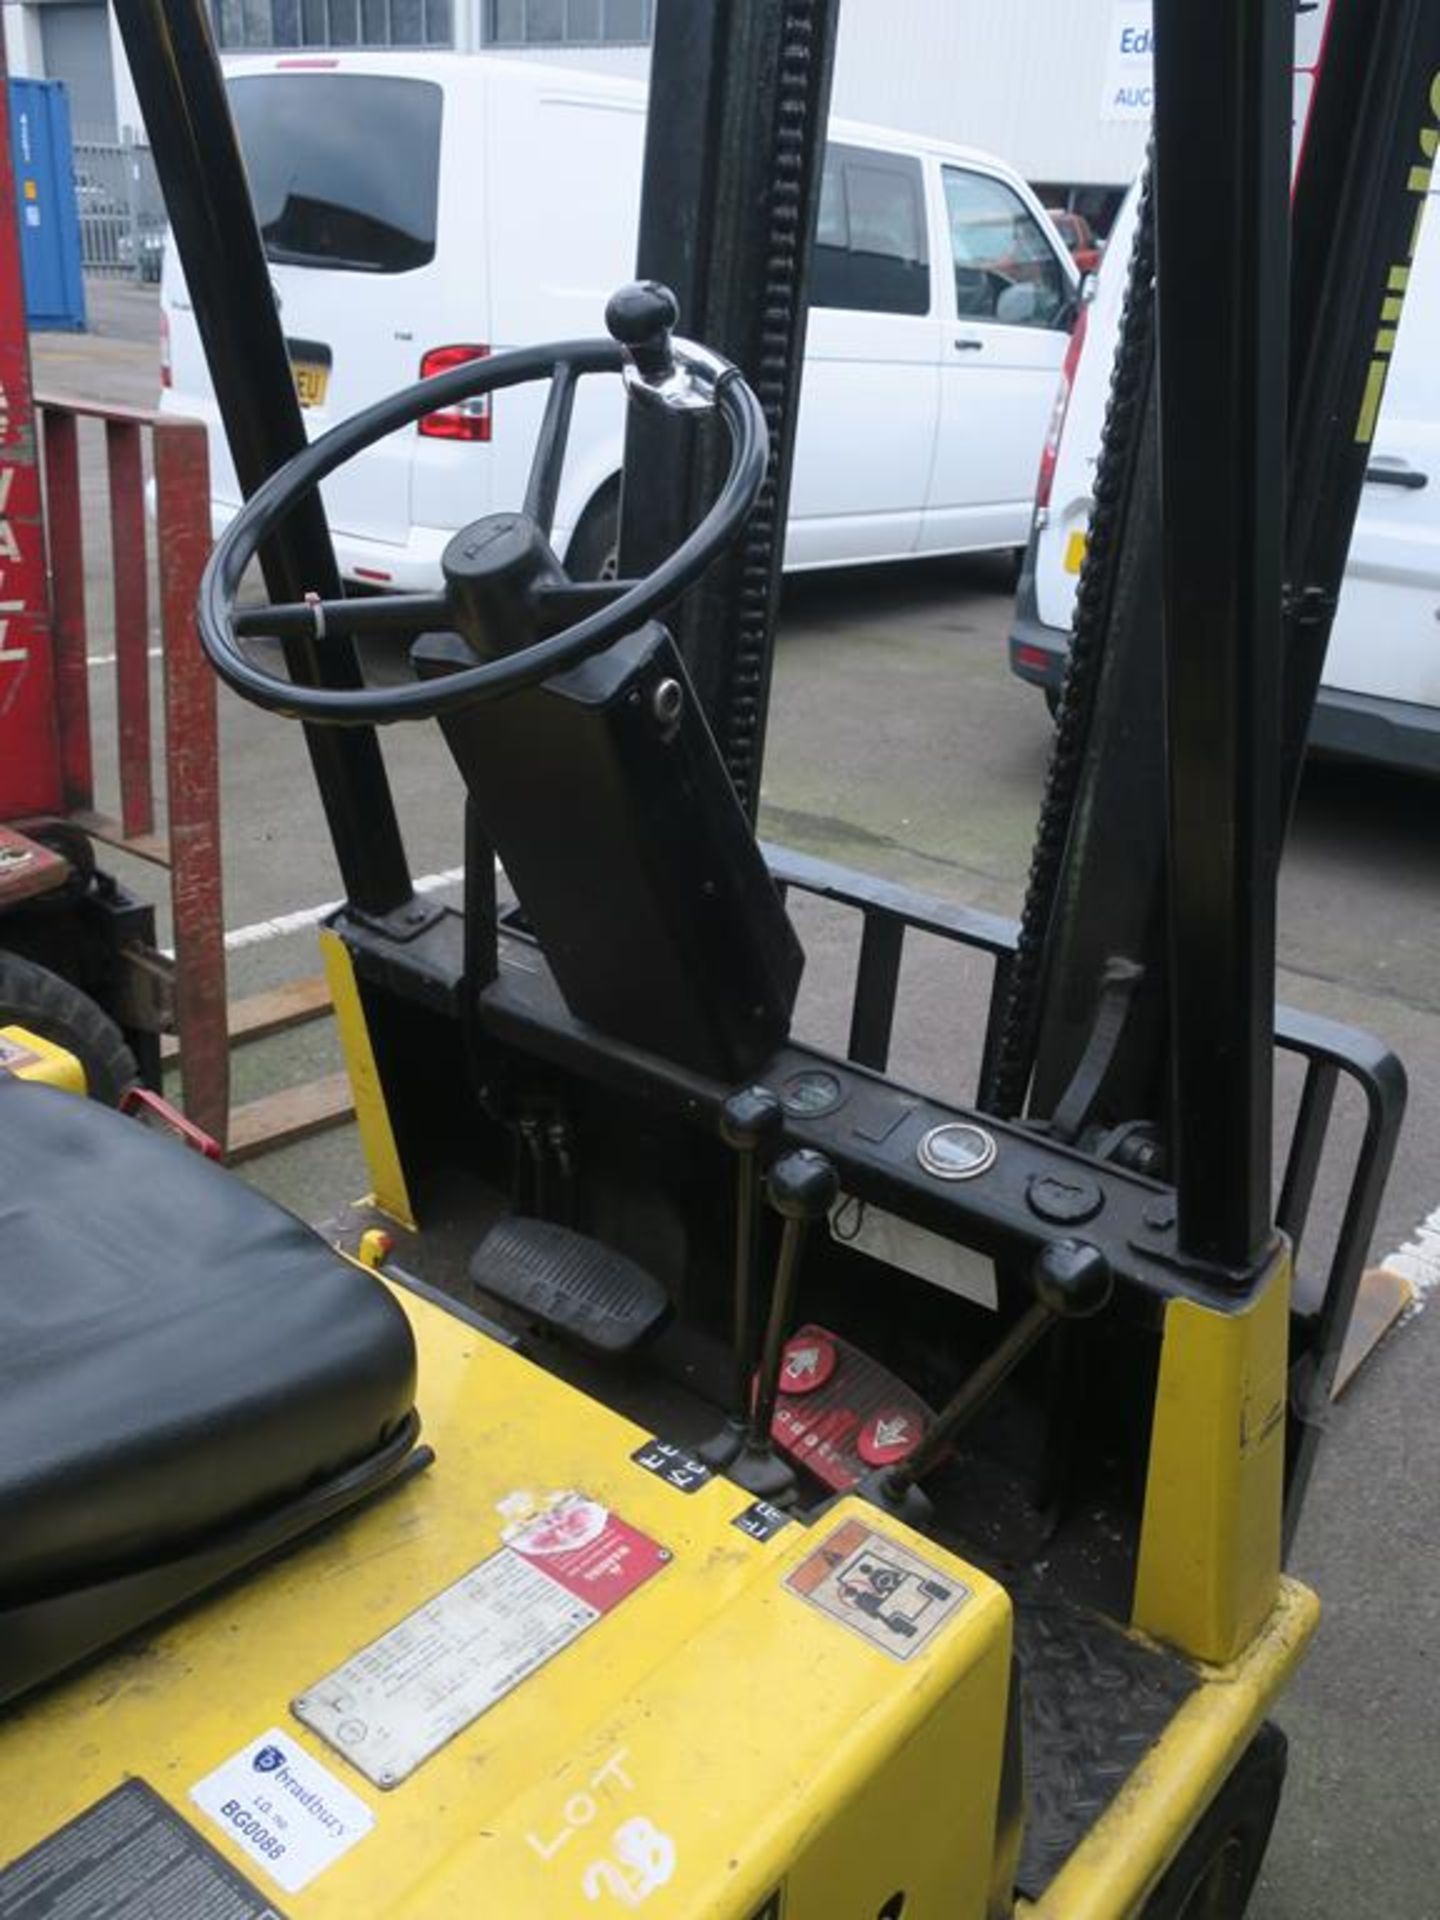 * Hyster 1.50 Electric Fork Lift comes with duplex mast, side shift and charger (RD Power - Image 5 of 10